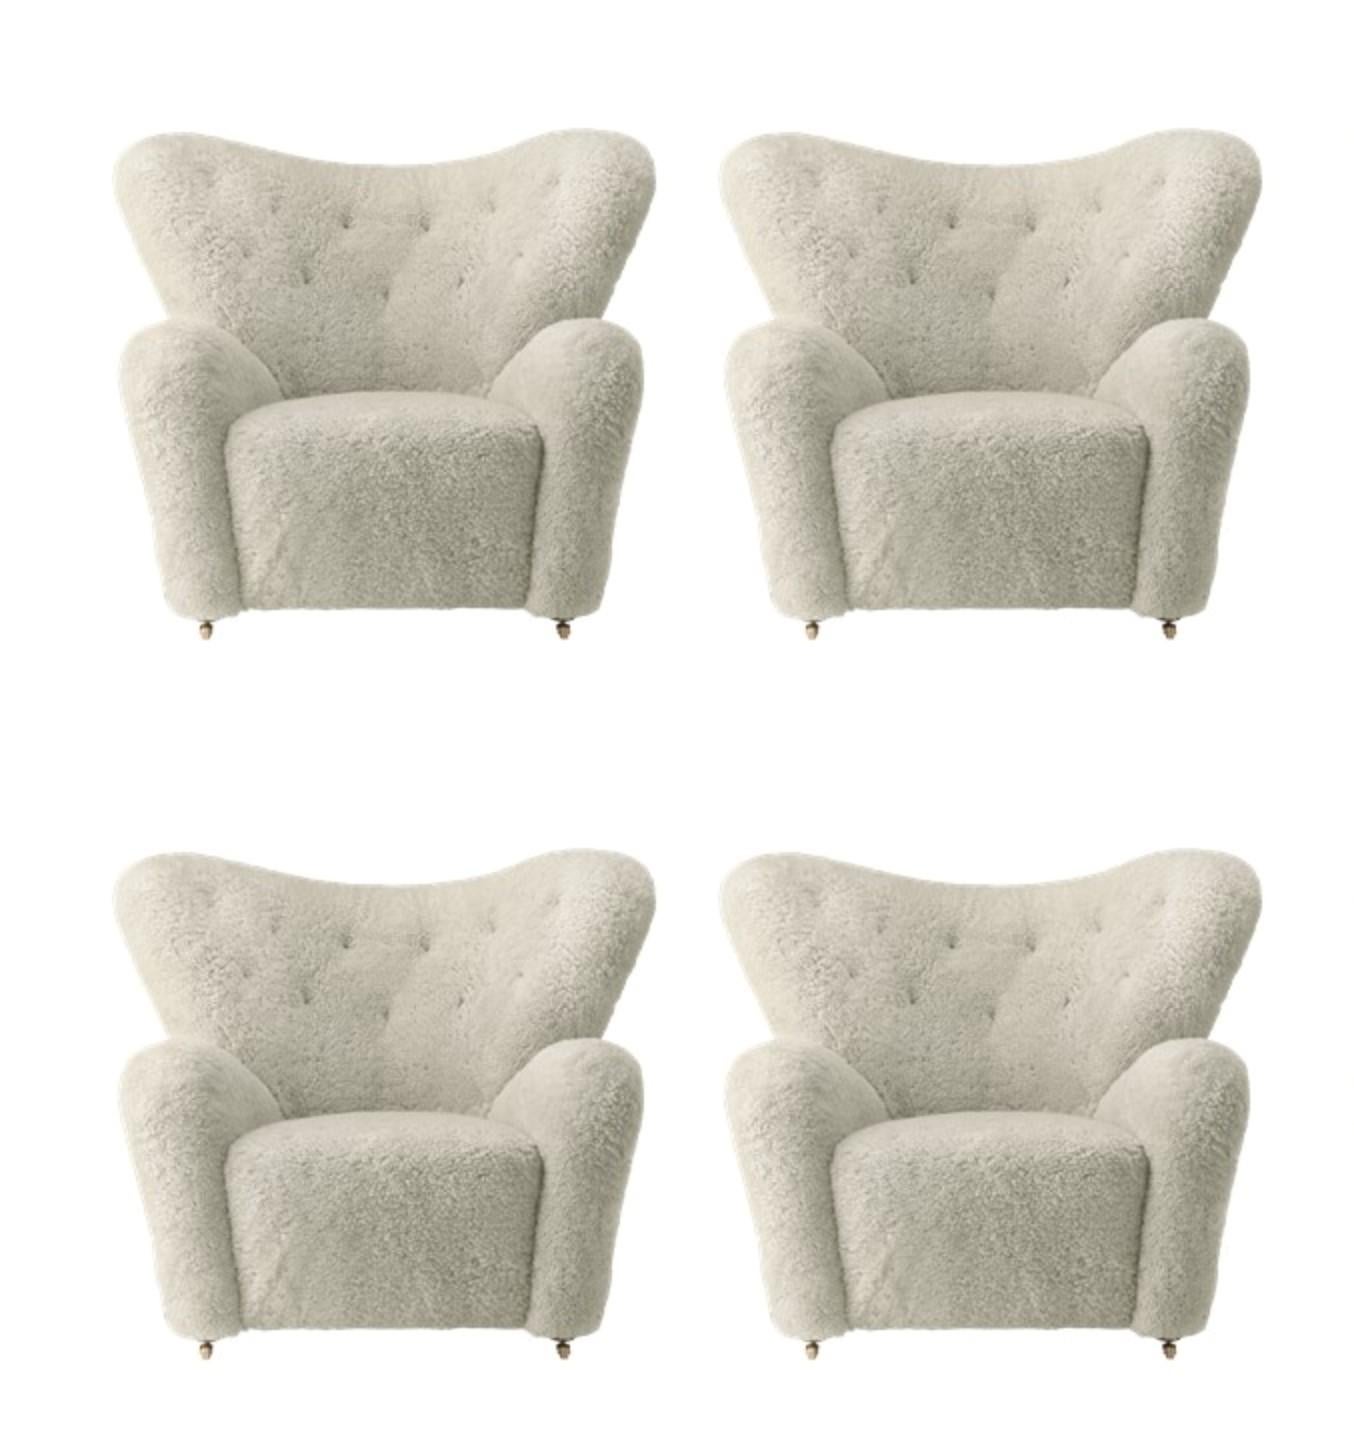 Set of 4 green tea sheepskin The Tired Man lounge chair by Lassen.
Dimensions: W 102 x D 87 x H 88 cm 
Materials: Sheepskin

Flemming Lassen designed the overstuffed easy chair, The Tired Man, for The Copenhagen Cabinetmakers’ Guild Competition